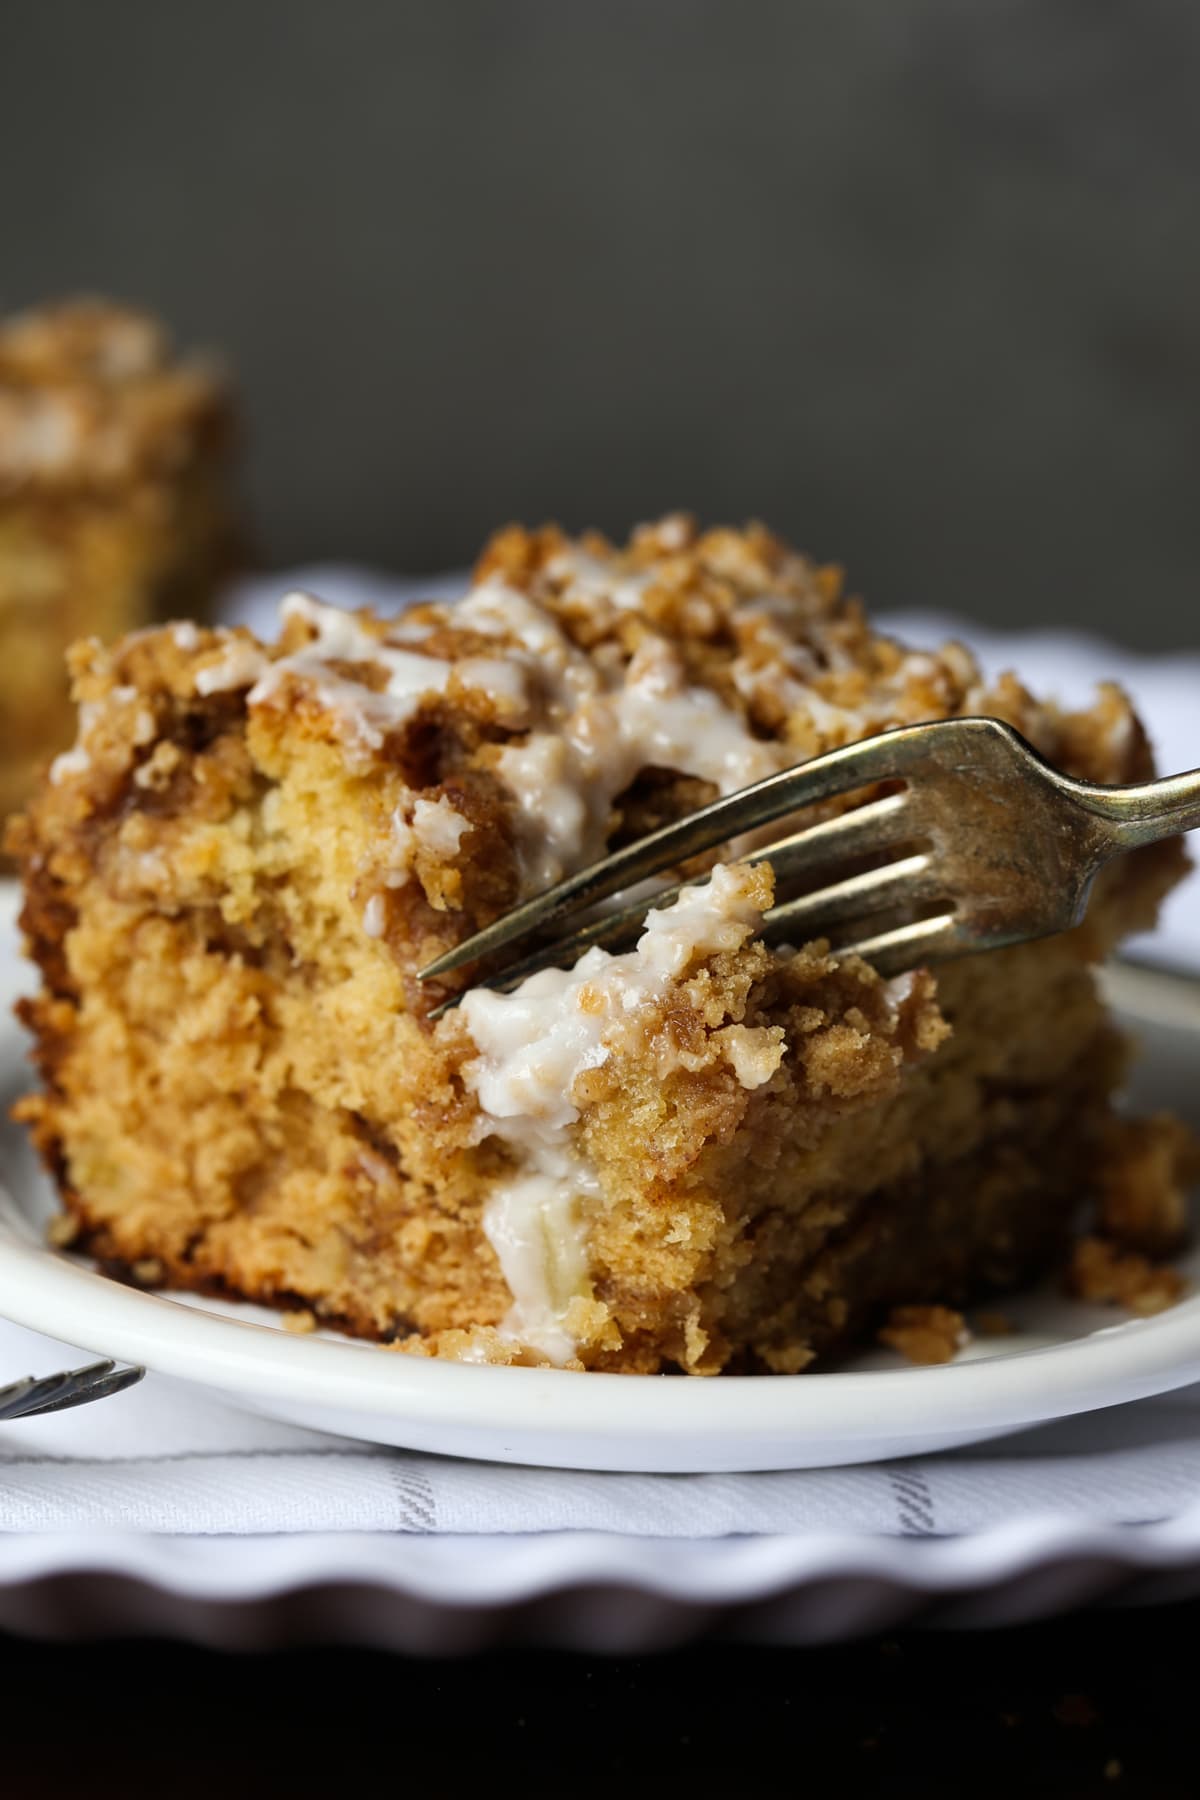 A slice of apple coffee cake on a plate with a fork taking a bite.